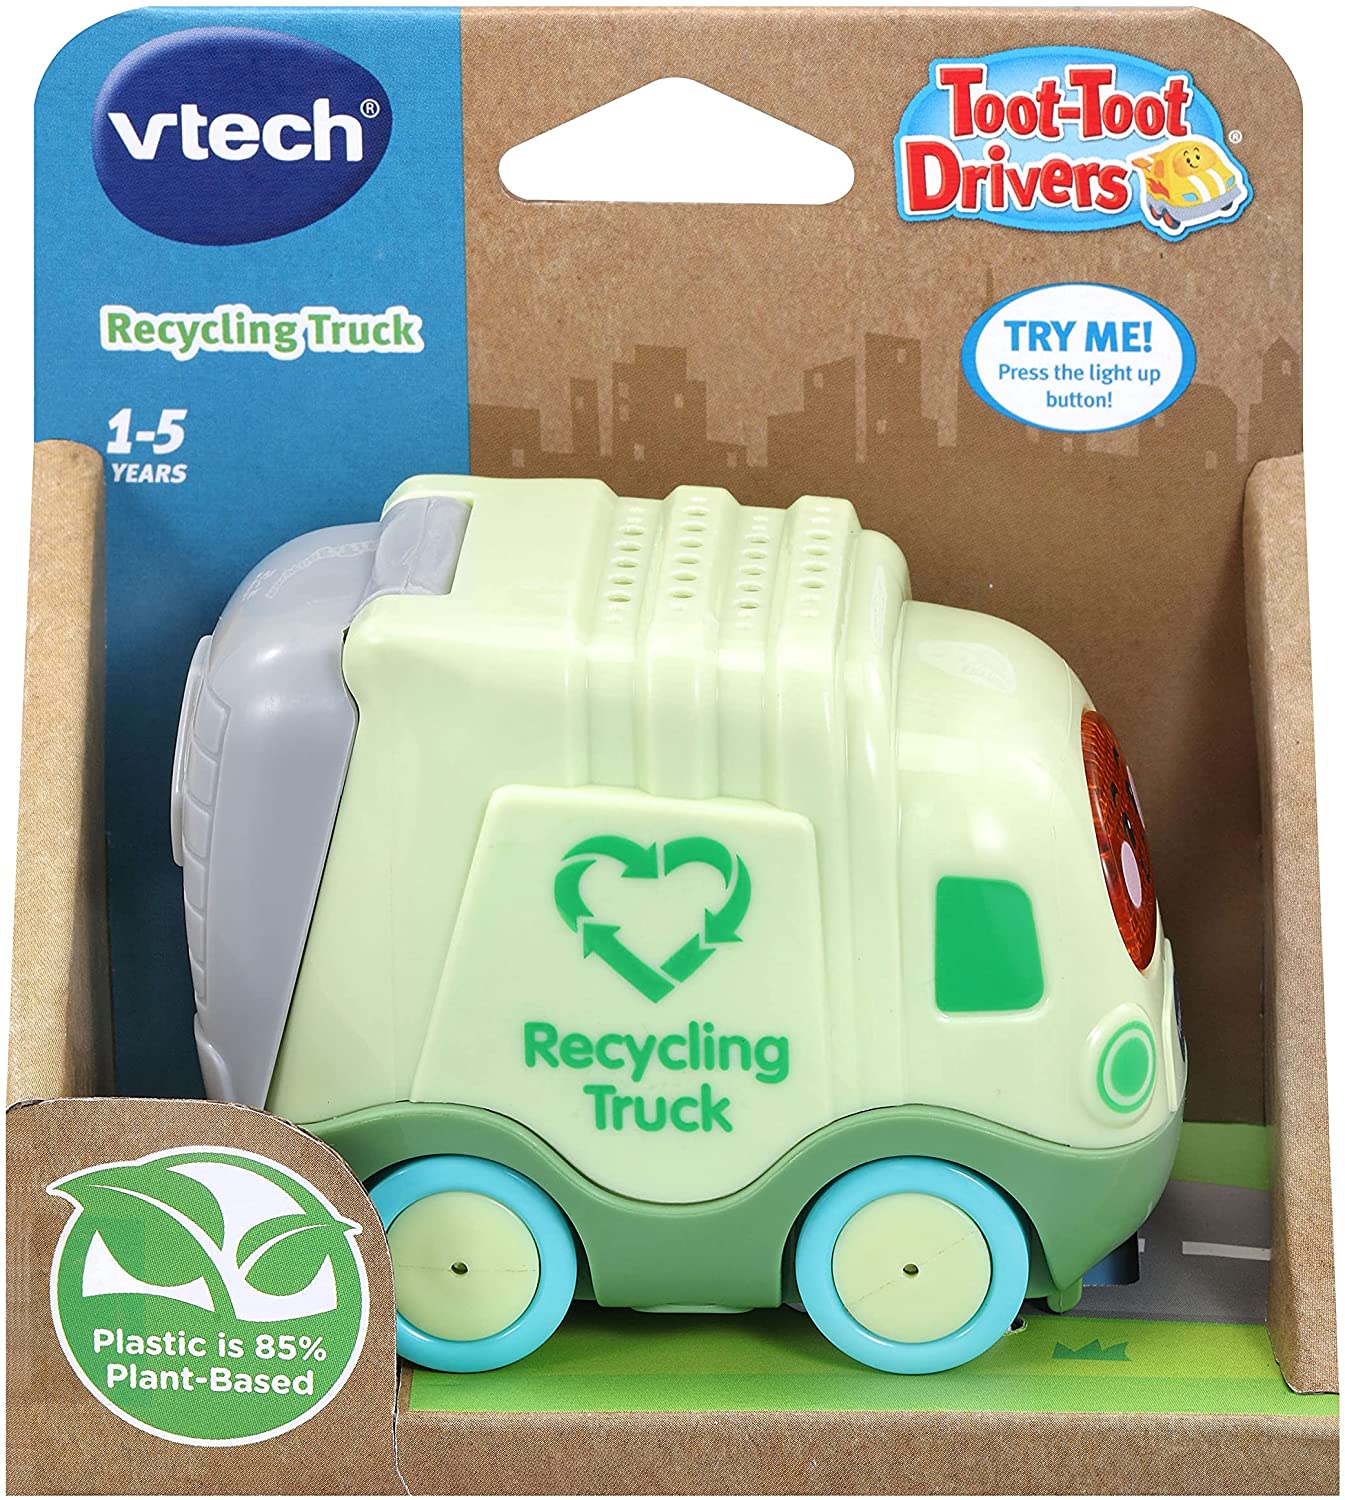 Toot-Toot Drivers Special Edition Recycling Truck